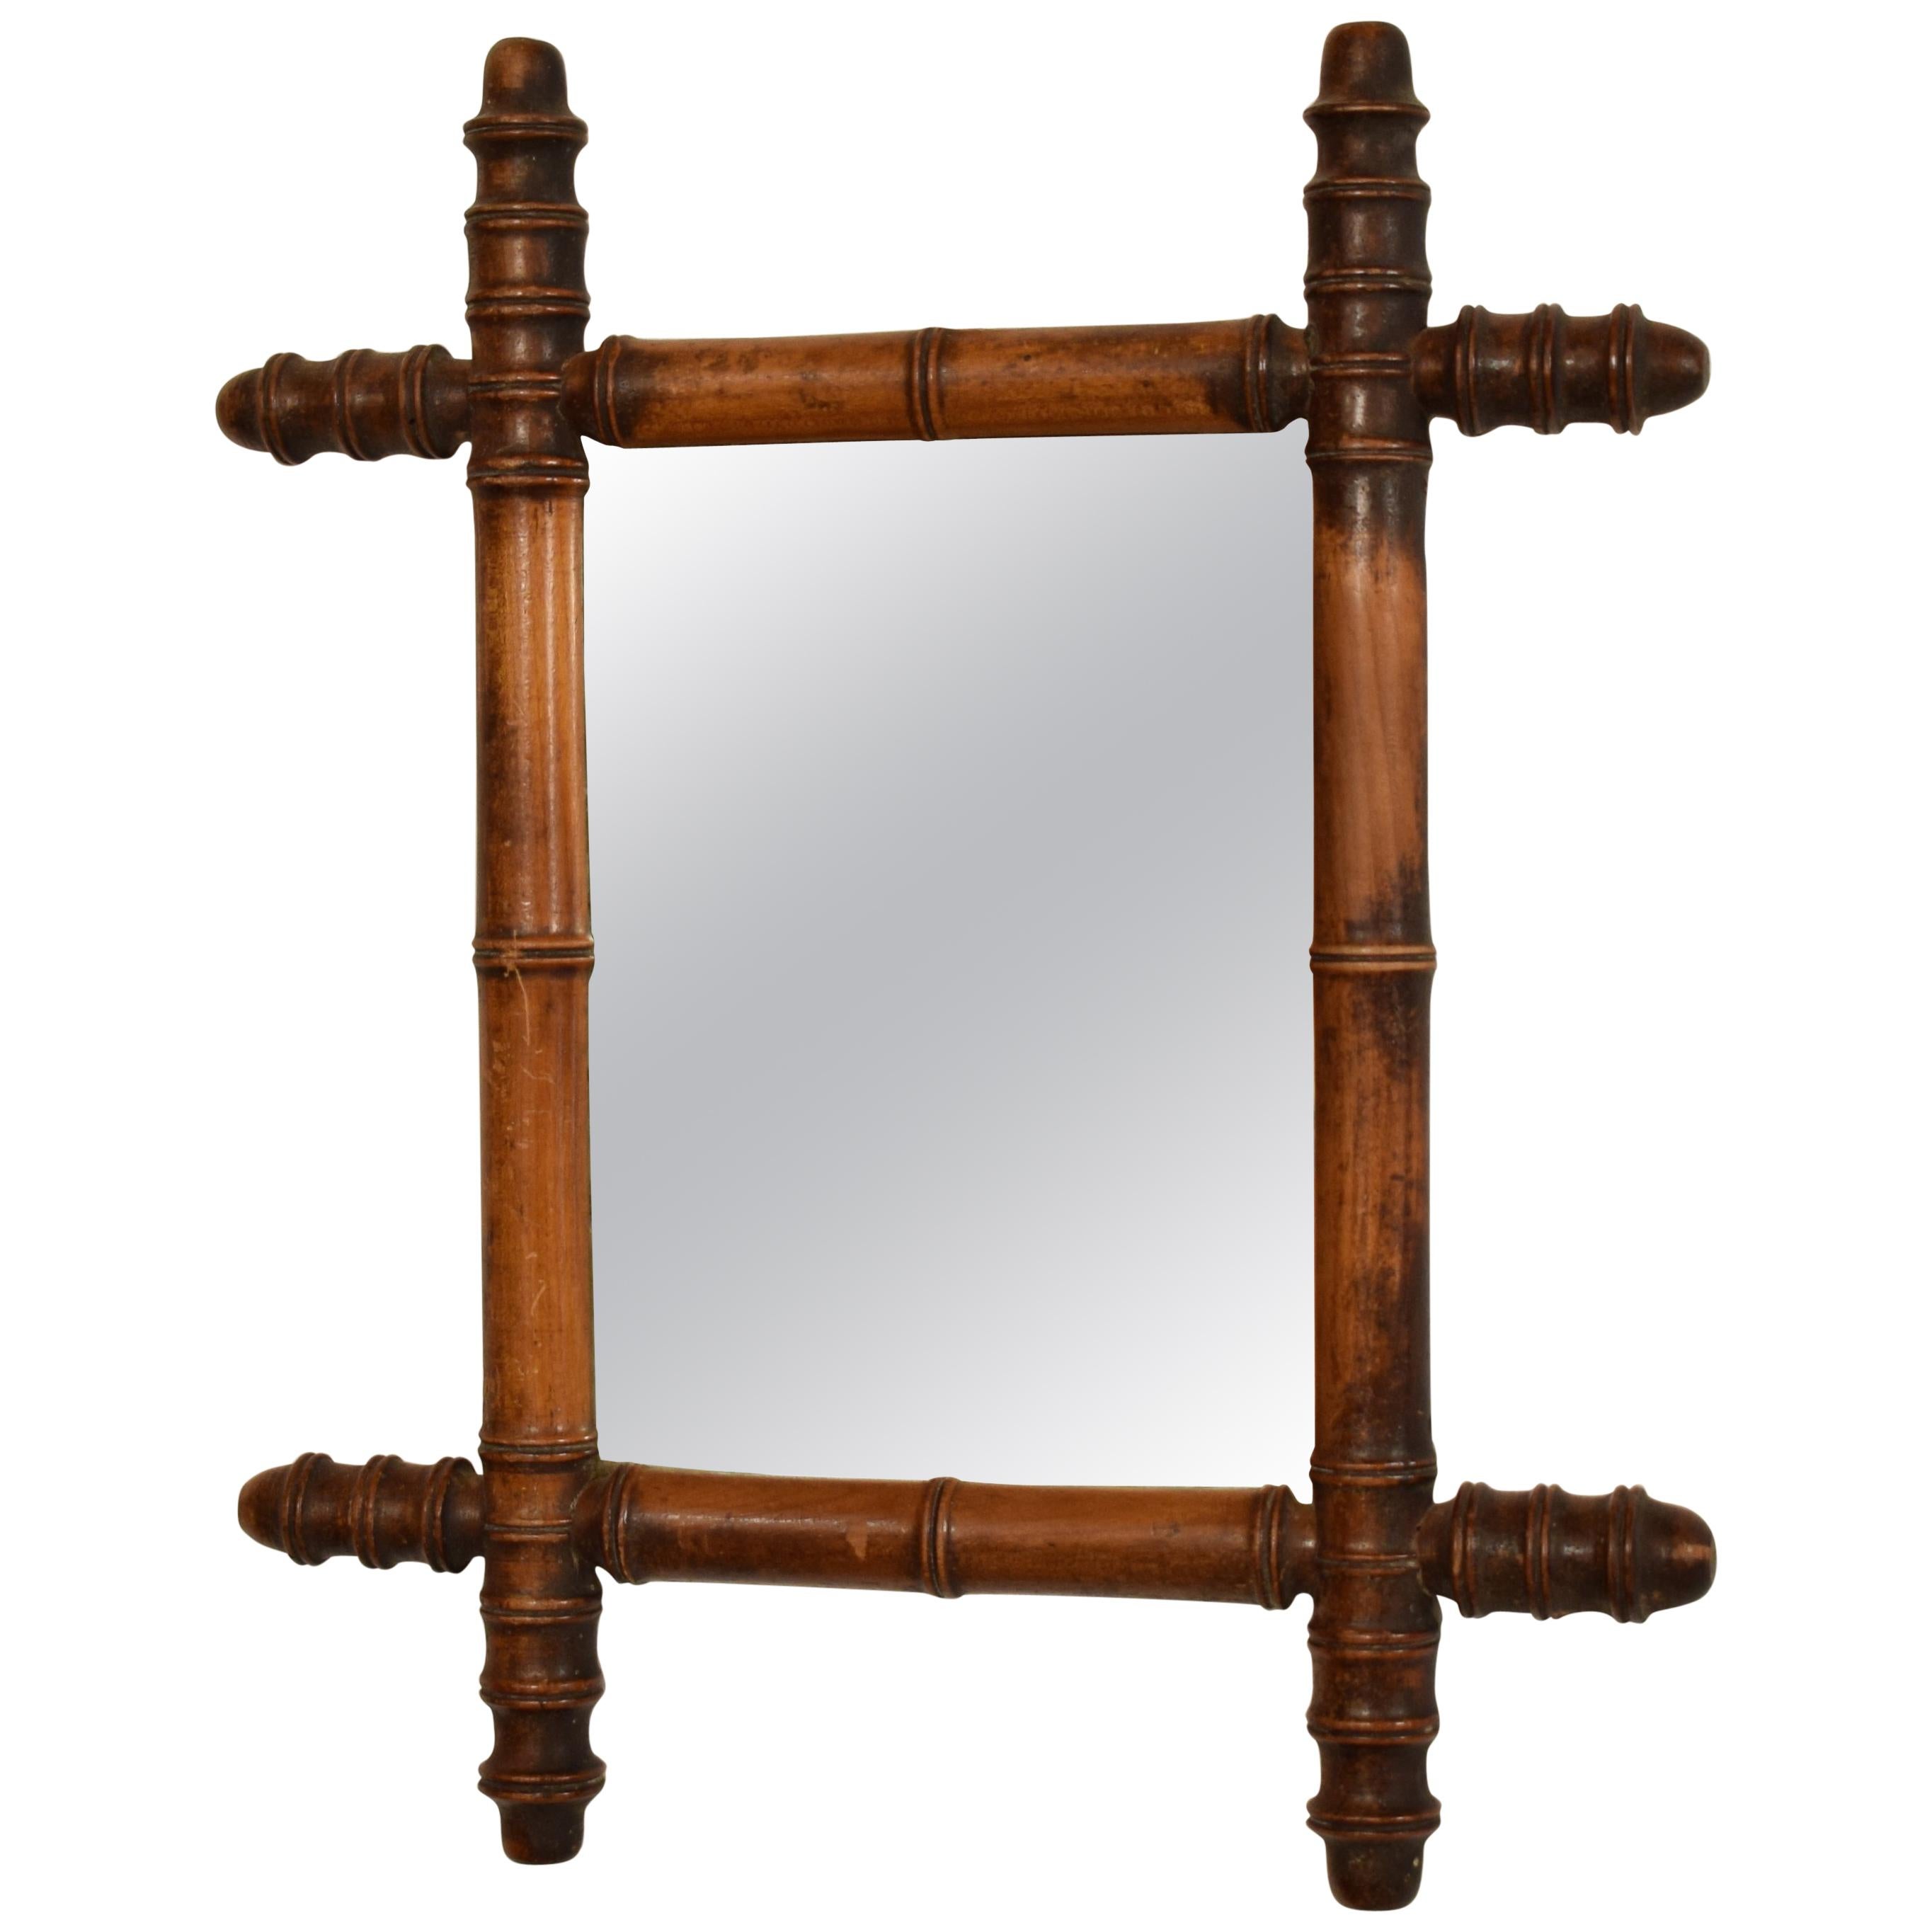 French 1940s Colonial Style Faux-Bamboo Mirror with Original Glass